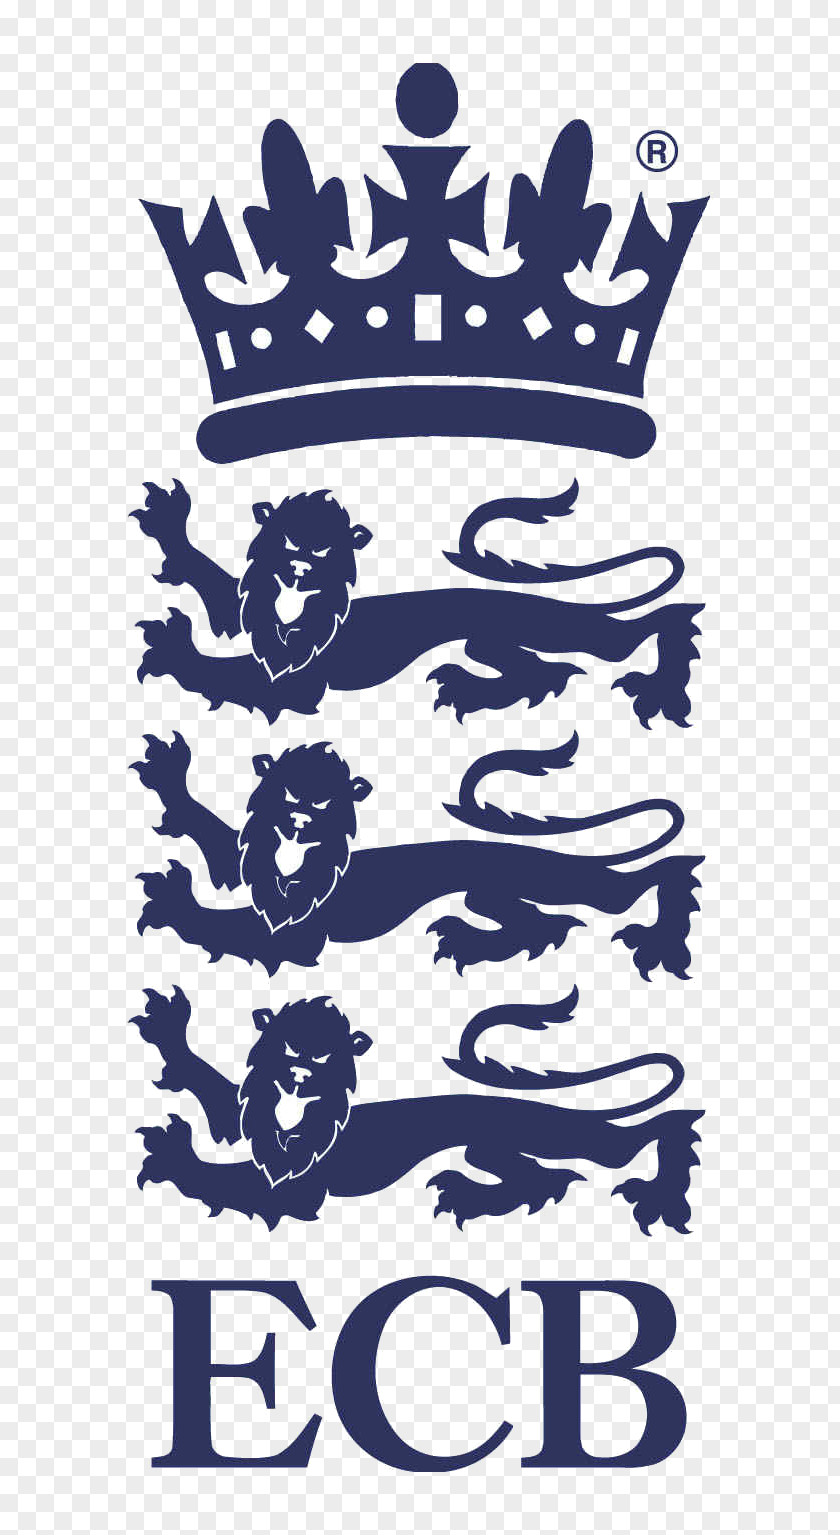 Cricket England Team And Wales Board World Cup Professional Cricketers' Association PNG